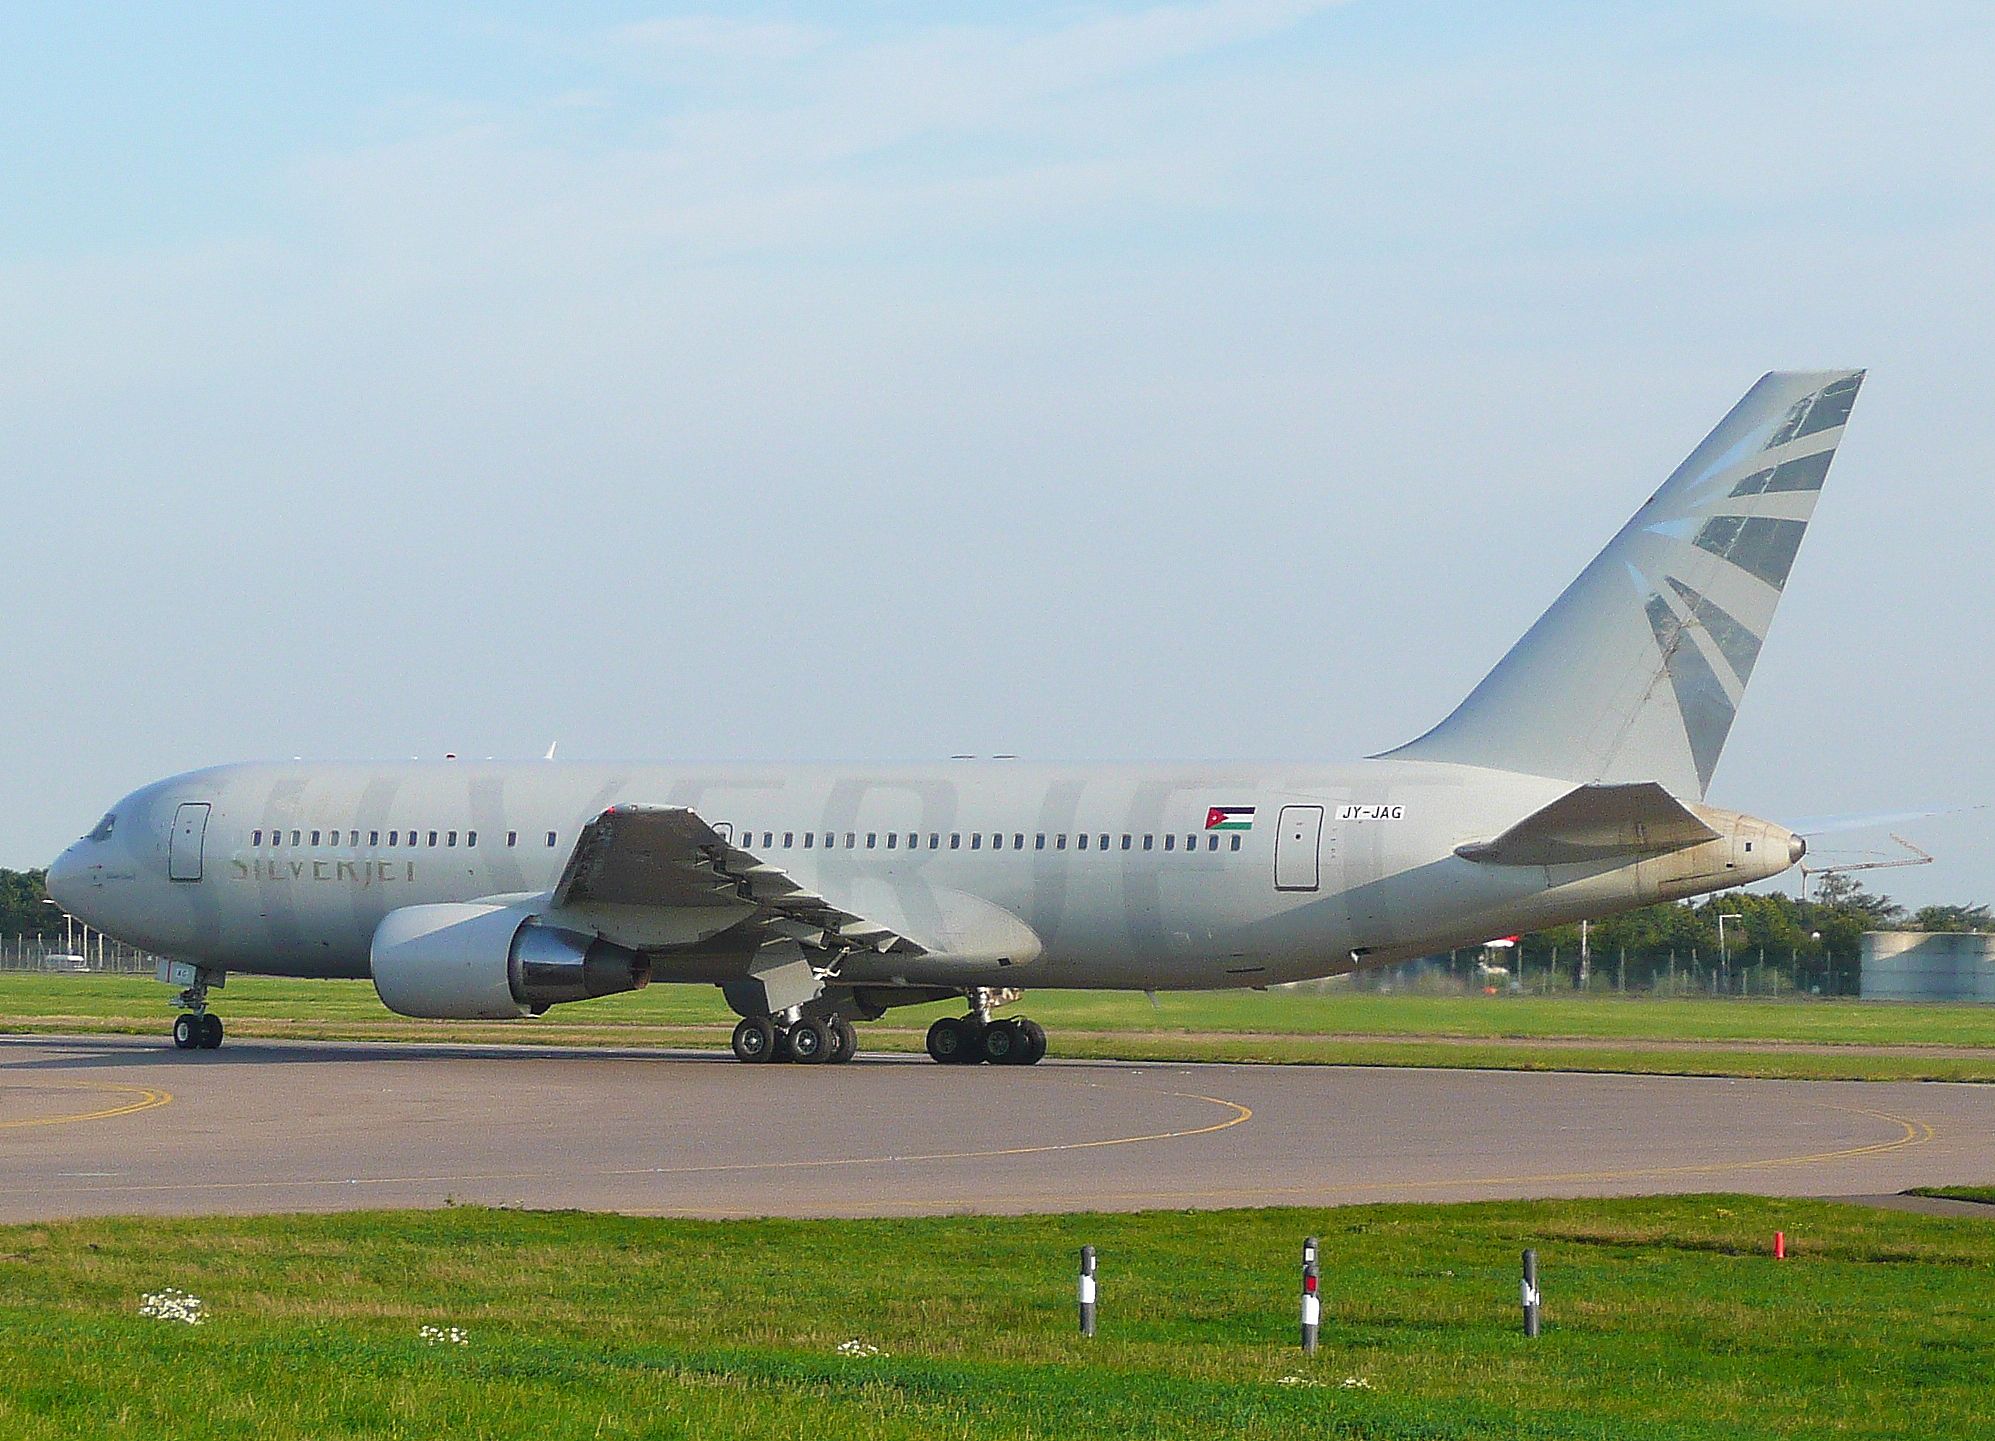 A Silverjet Boeing 767-200 on an airport apron.